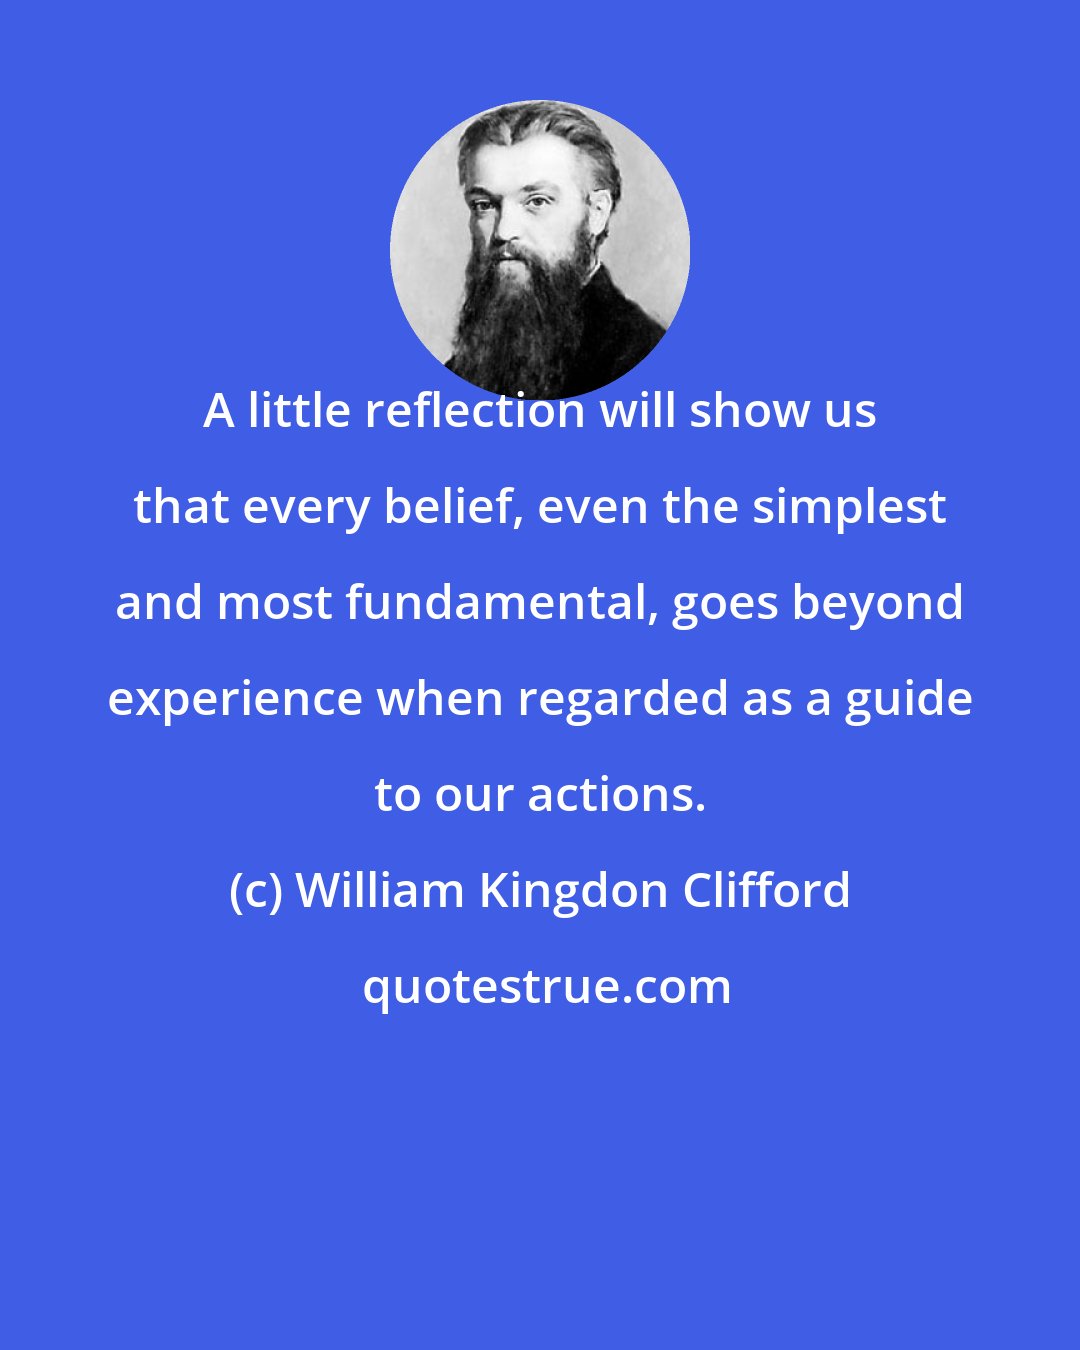 William Kingdon Clifford: A little reflection will show us that every belief, even the simplest and most fundamental, goes beyond experience when regarded as a guide to our actions.